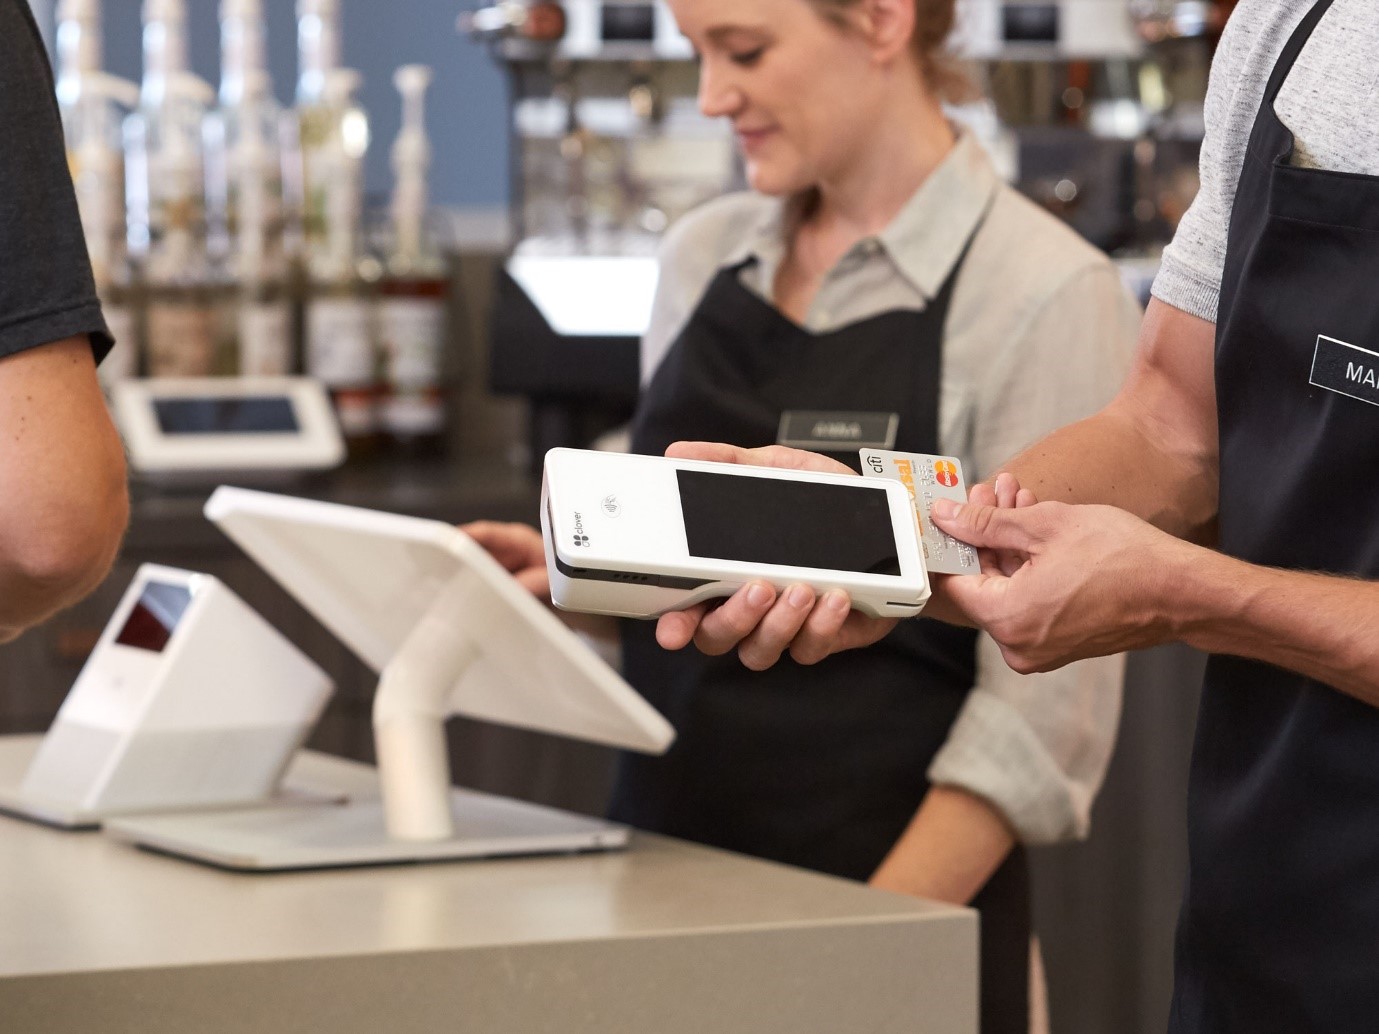 What Are the Essential Features to Look for in Restaurant POS System Software?